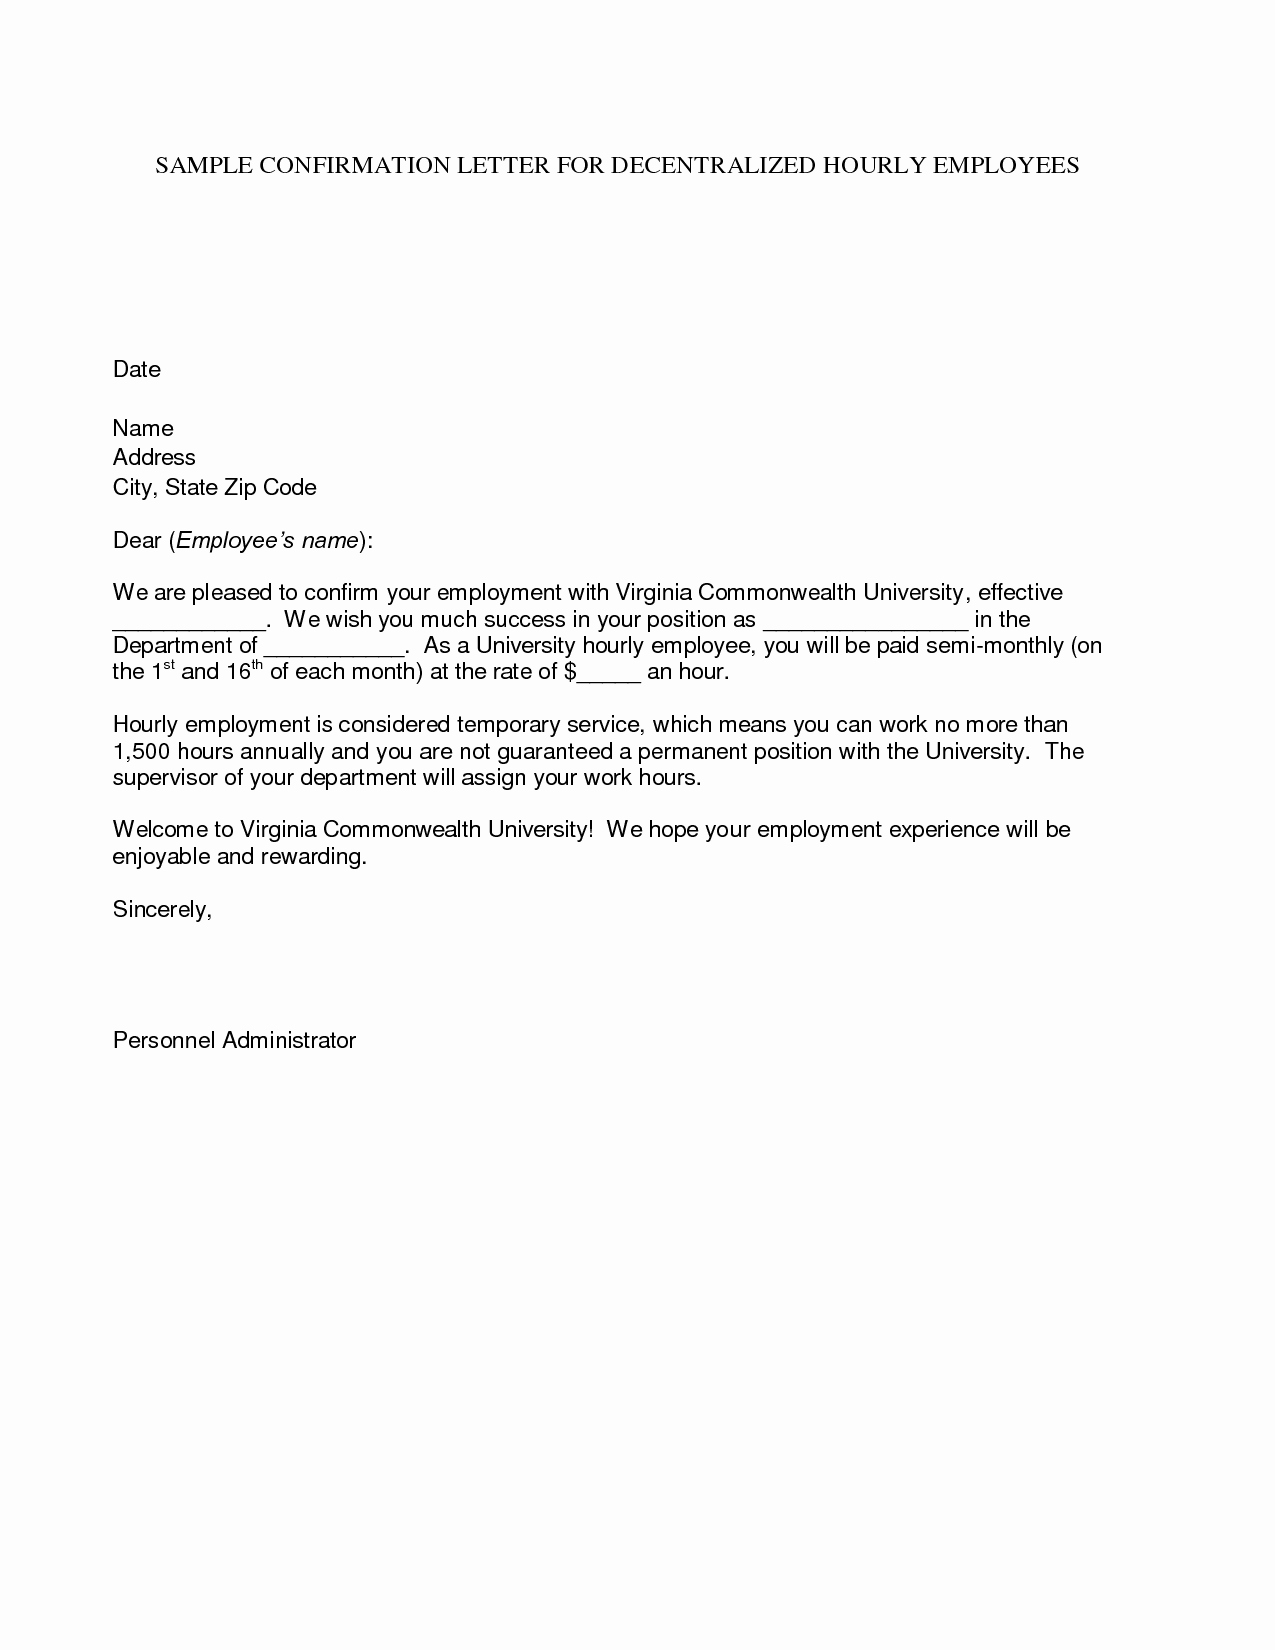 Temp to Perm Offer Letter Best Of 10 Best Of Confirmation Letter Sample Catholic